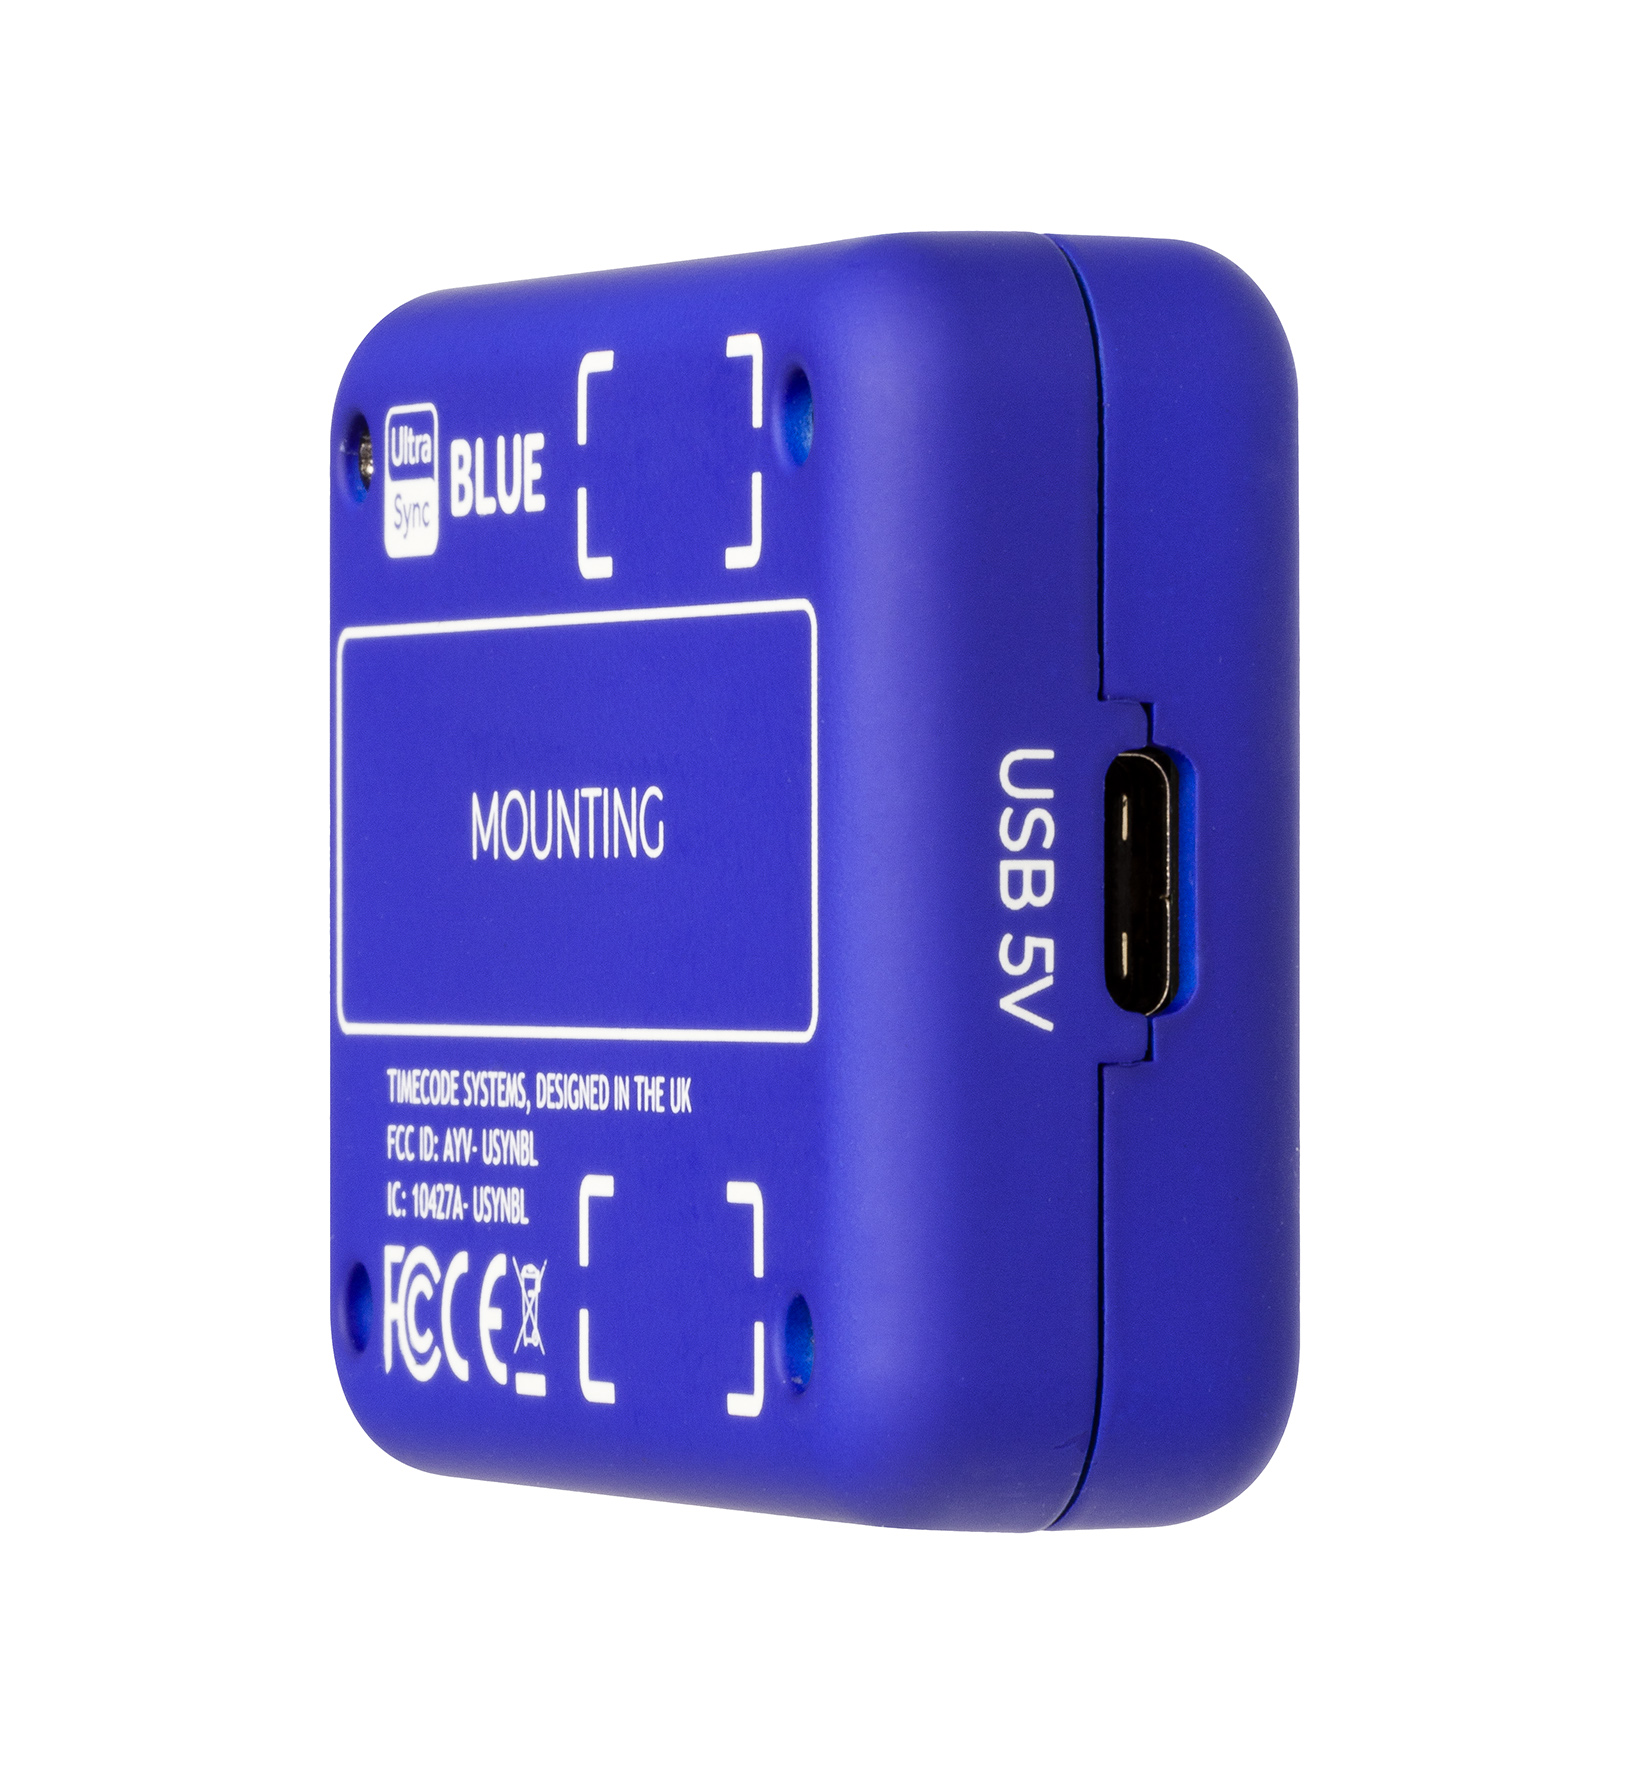 UltraSync BLUE wireless sync over Bluetooth® | Timecode Systems | Shop